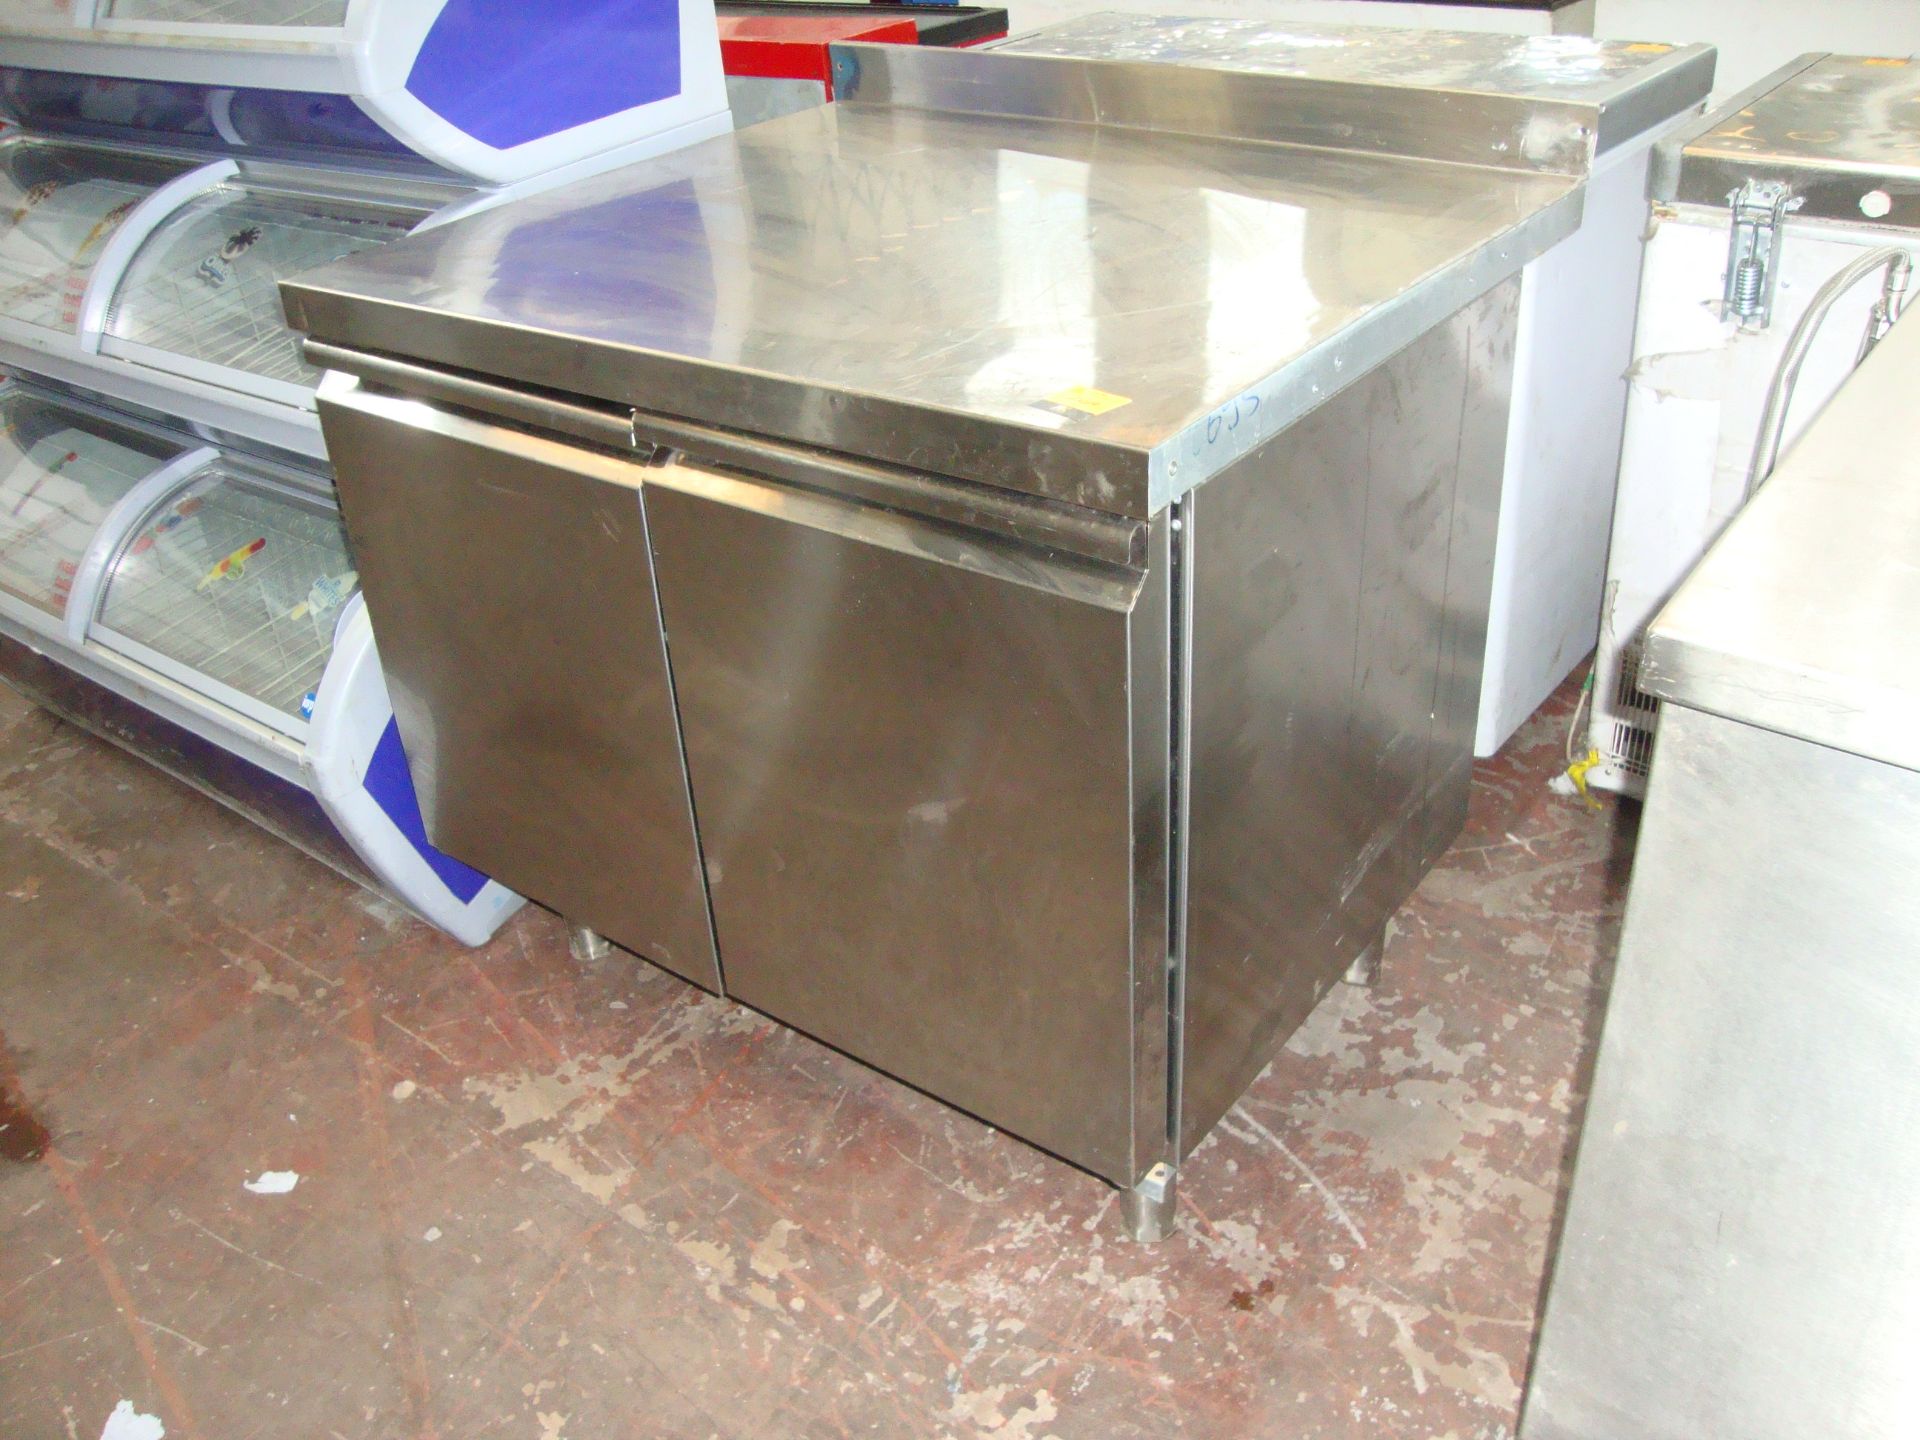 Large stainless steel cupboard with max overall dimensions circa 1000 x 870 x 930mm. NB. The counter